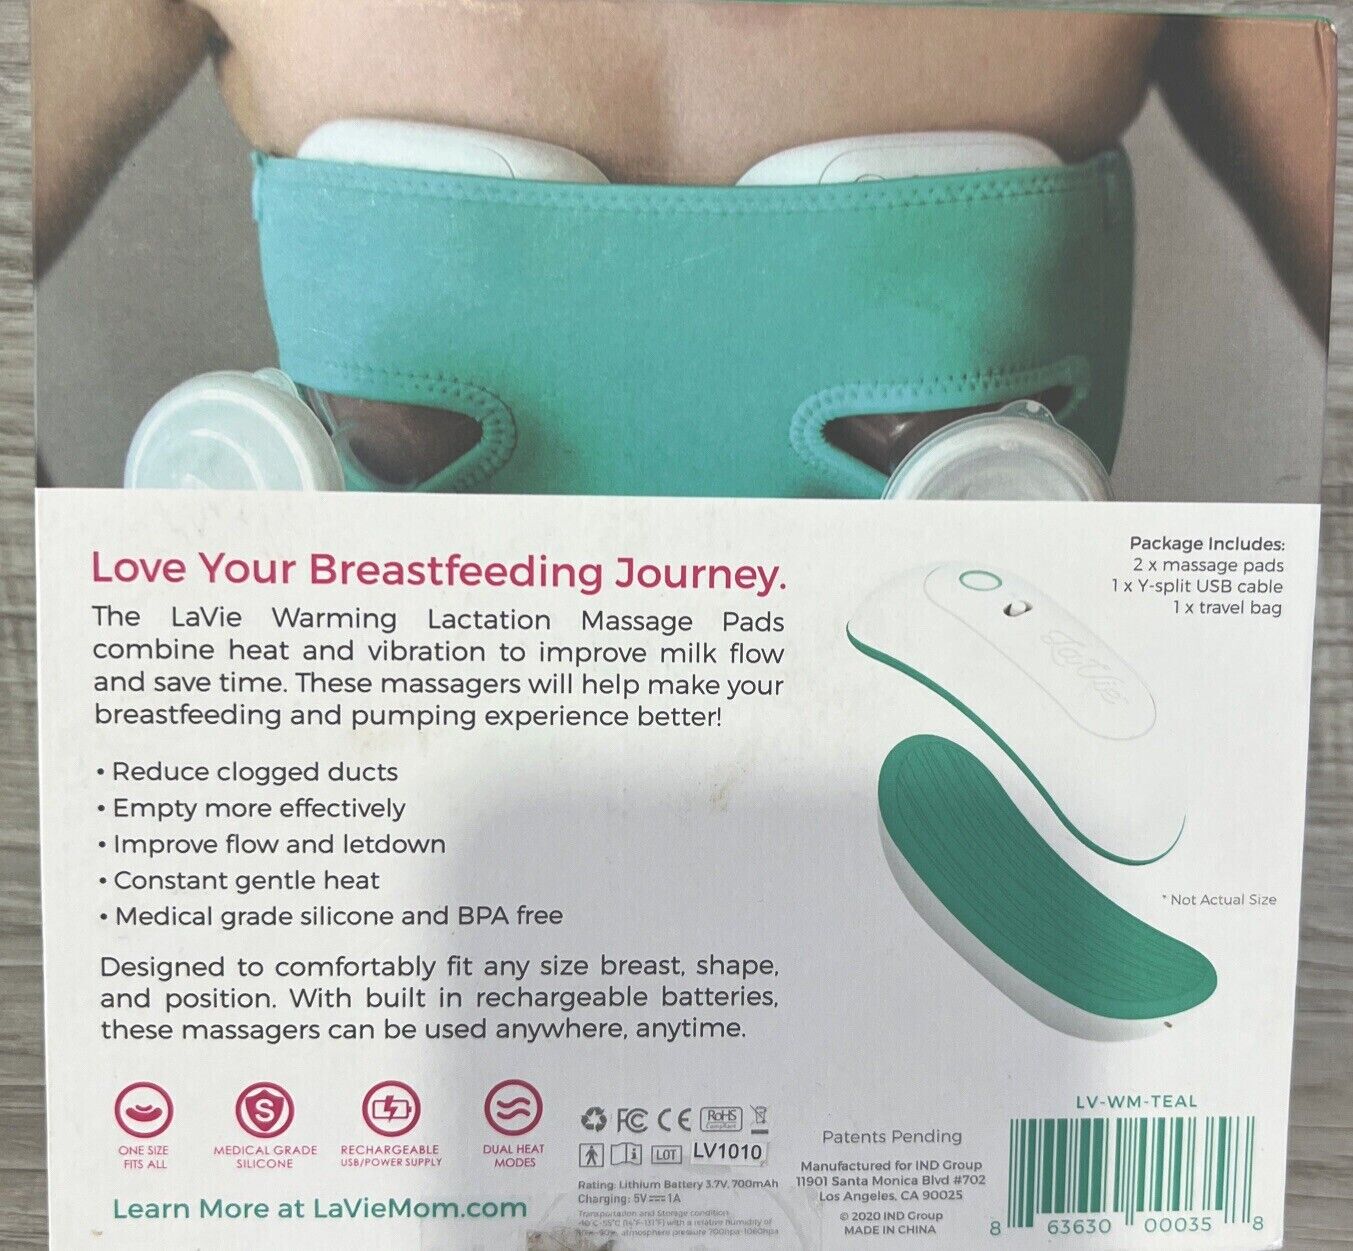 LaVie 2-in-1 Warming Lactation Massager, Heat and Vibration